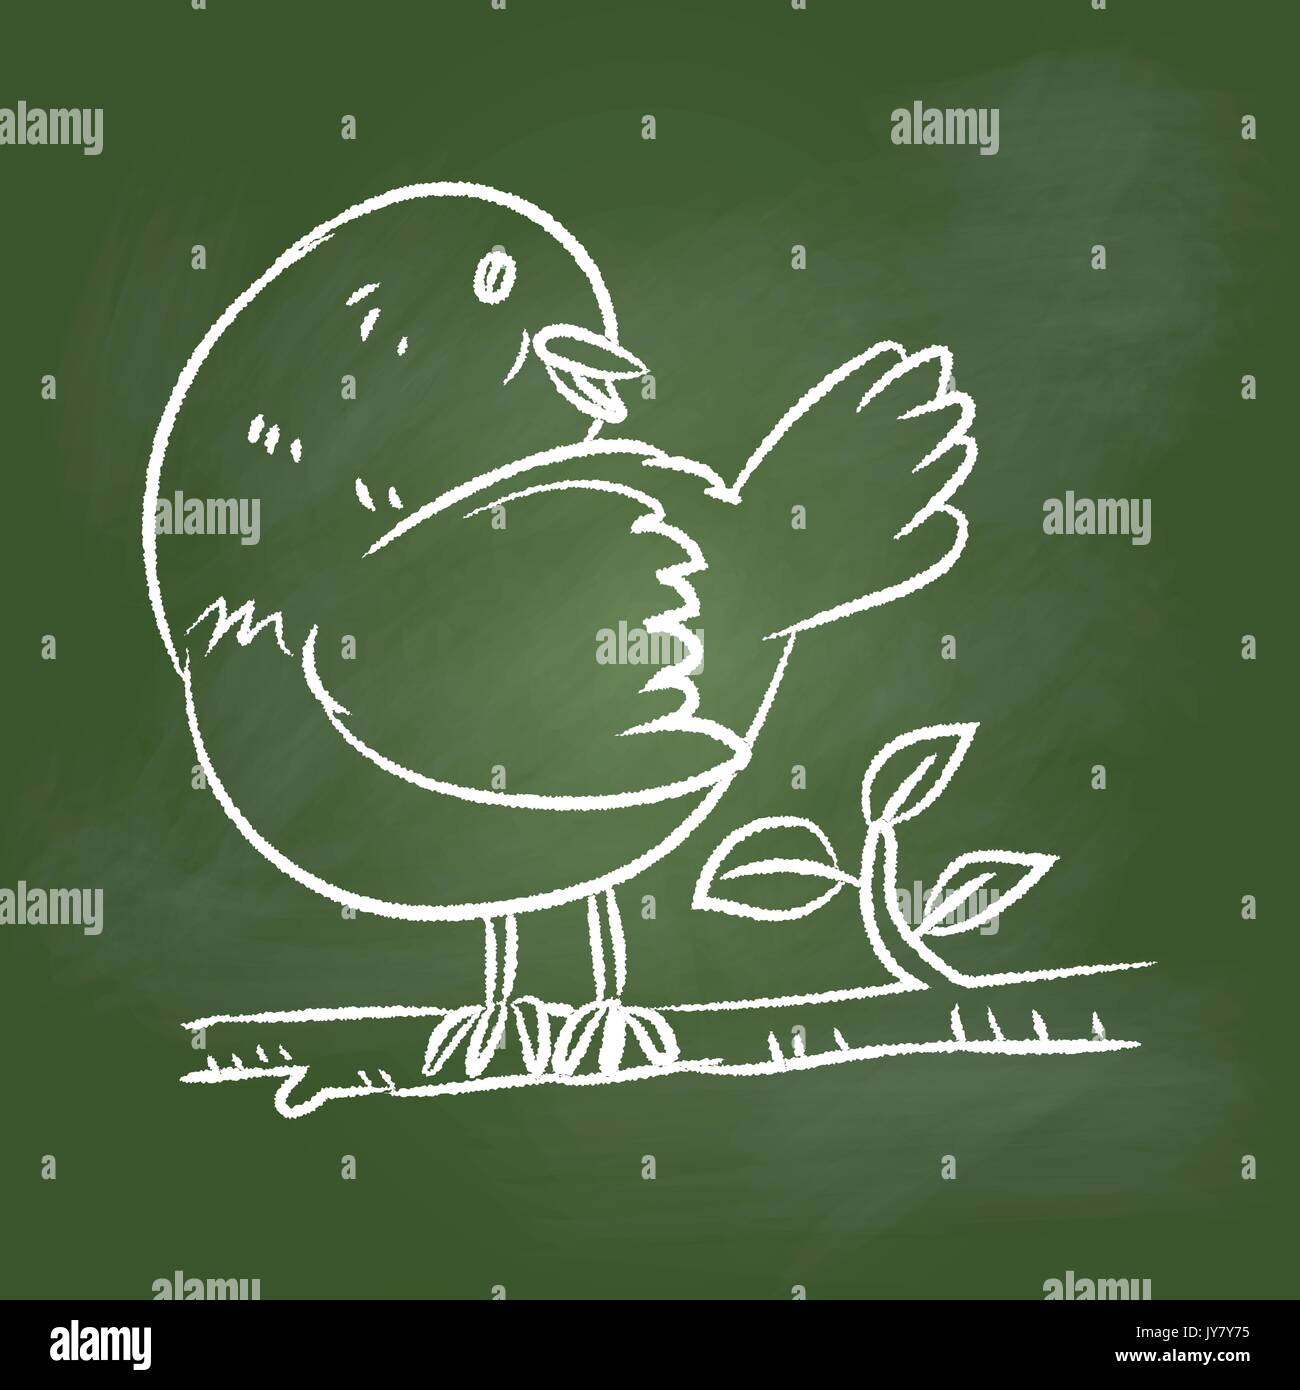 Hand drawing of a bird on branch with textured green board. Education Concept, Vector Illustration Stock Vector